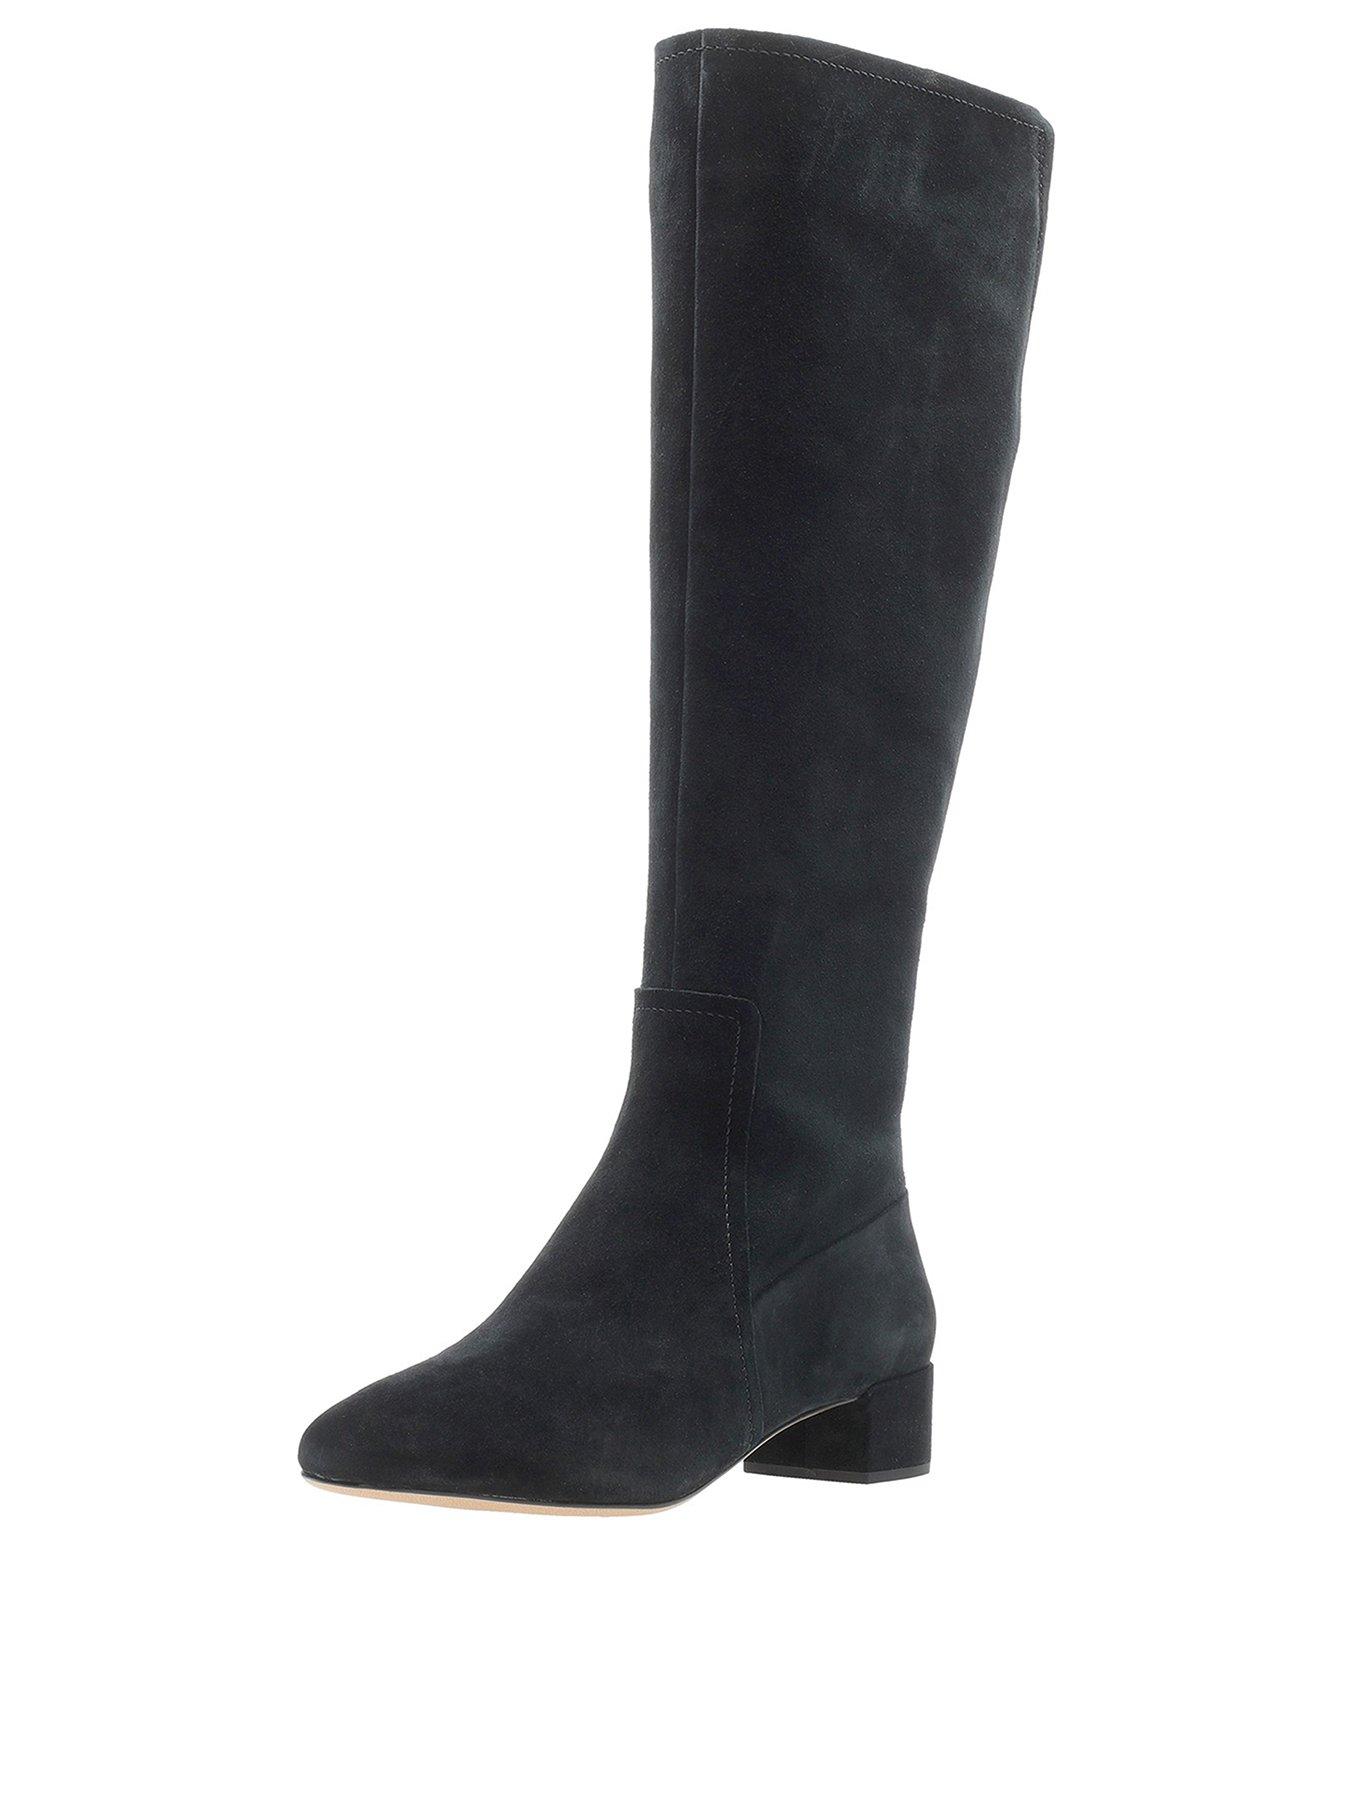 clarks knee high boots sale